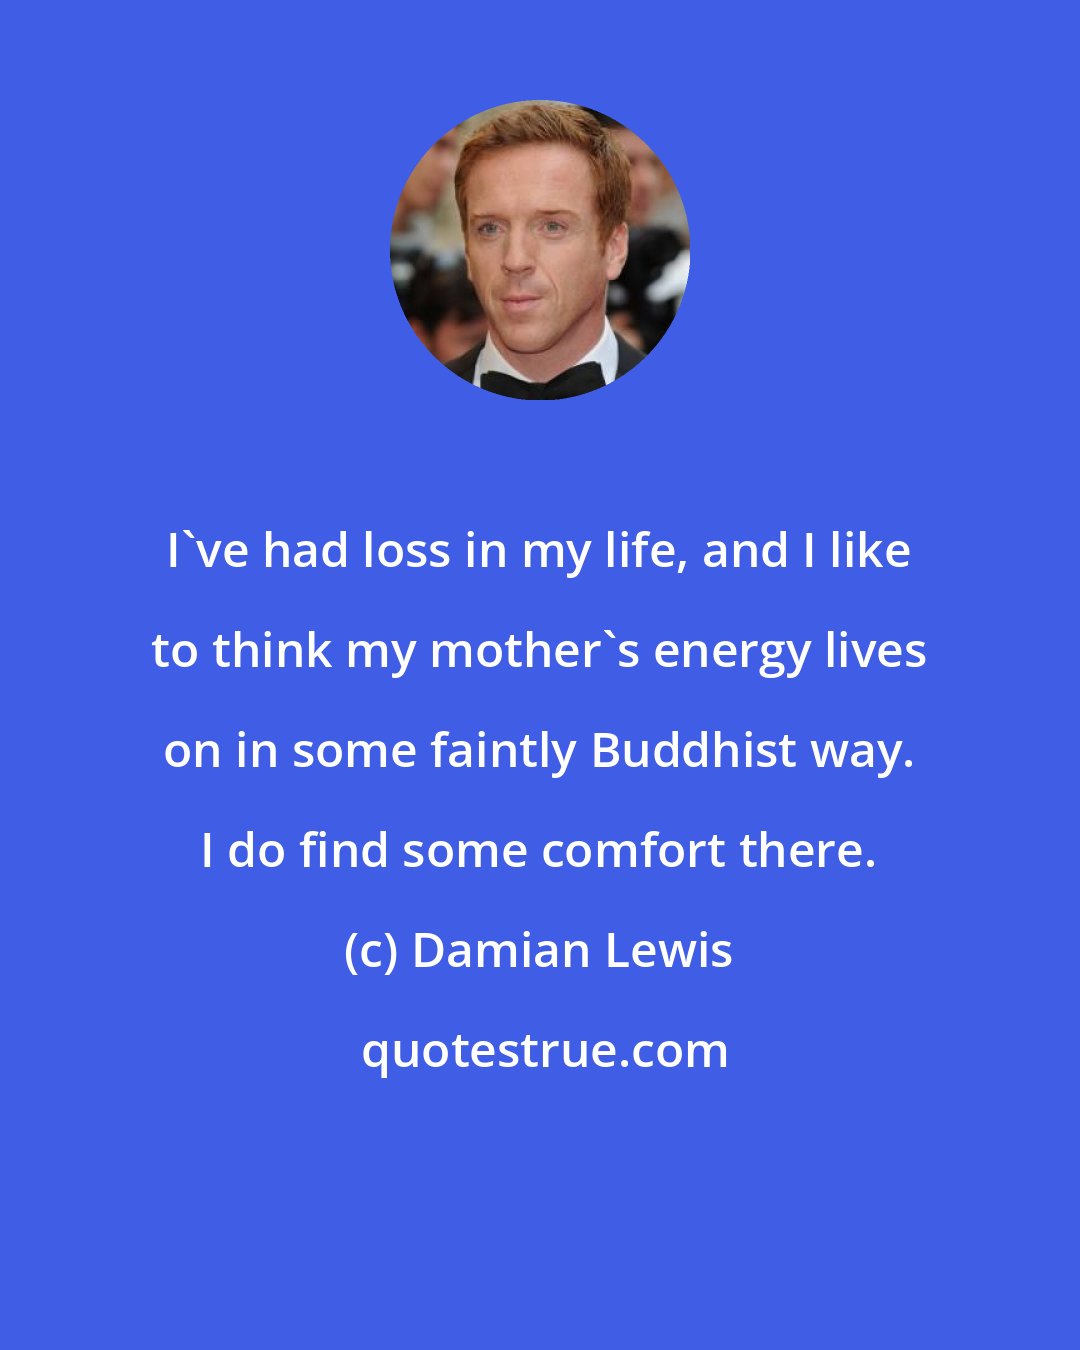 Damian Lewis: I've had loss in my life, and I like to think my mother's energy lives on in some faintly Buddhist way. I do find some comfort there.